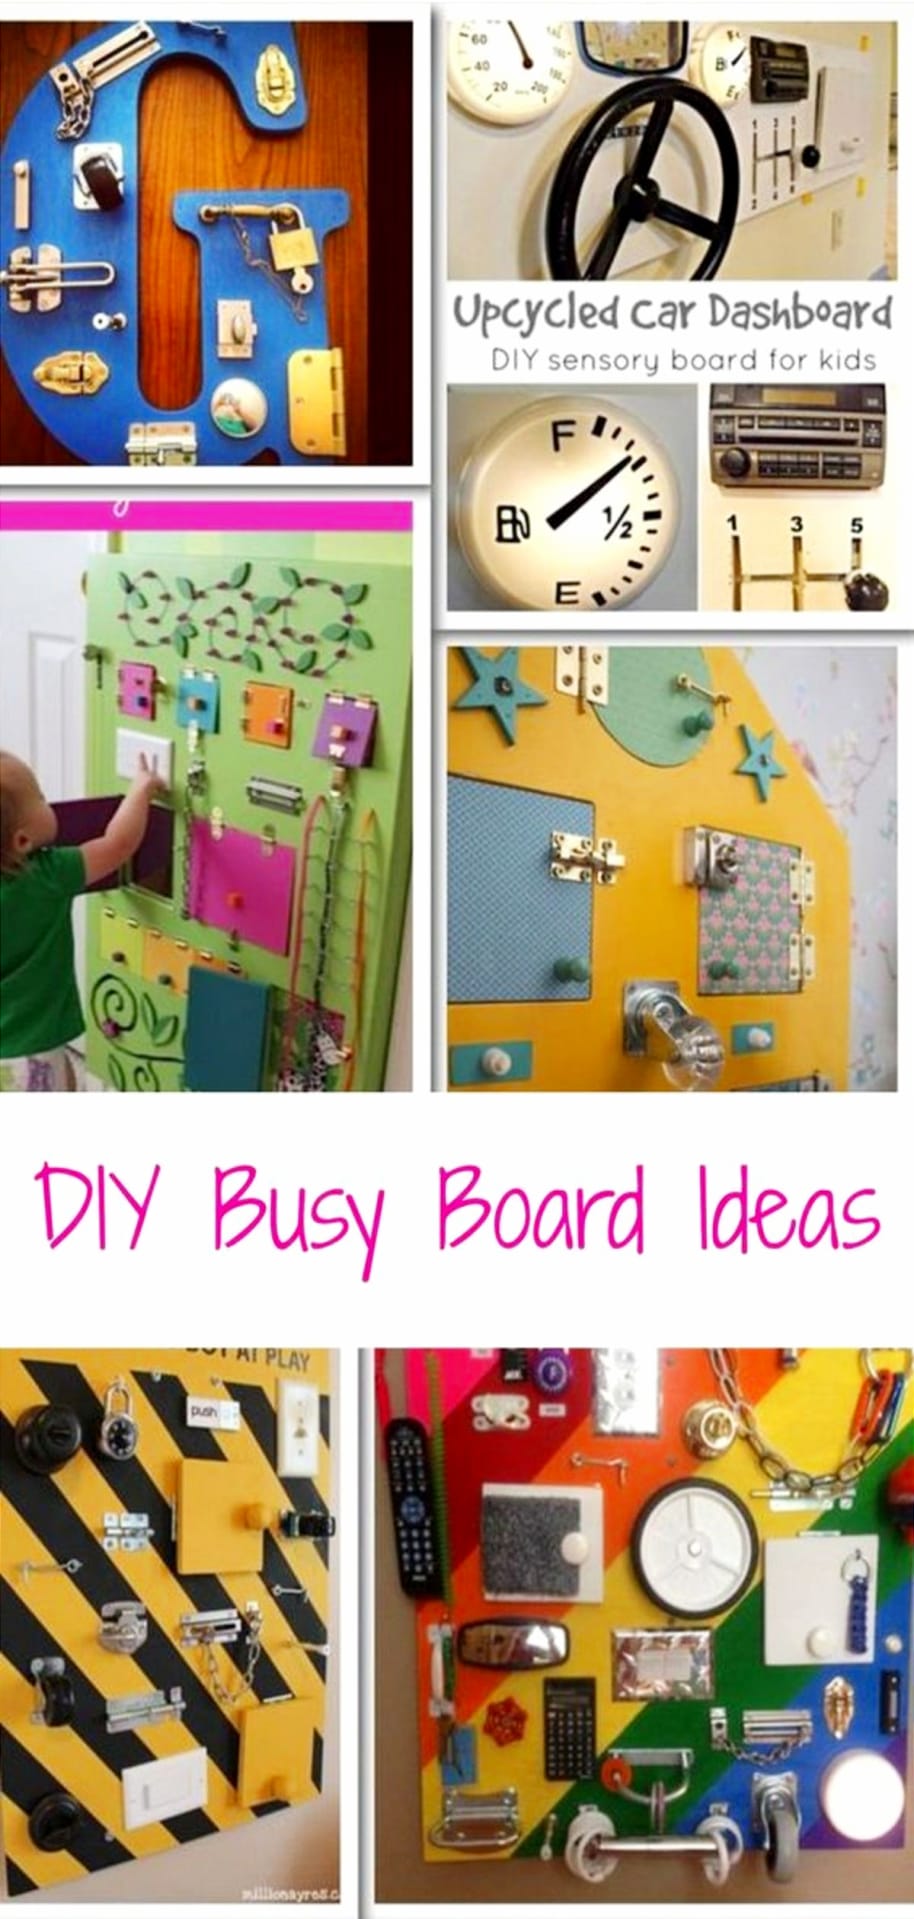 Busy board ideas for toddlers and one year olds - DIY sensory board ideas and latch board ideas for 1 year old